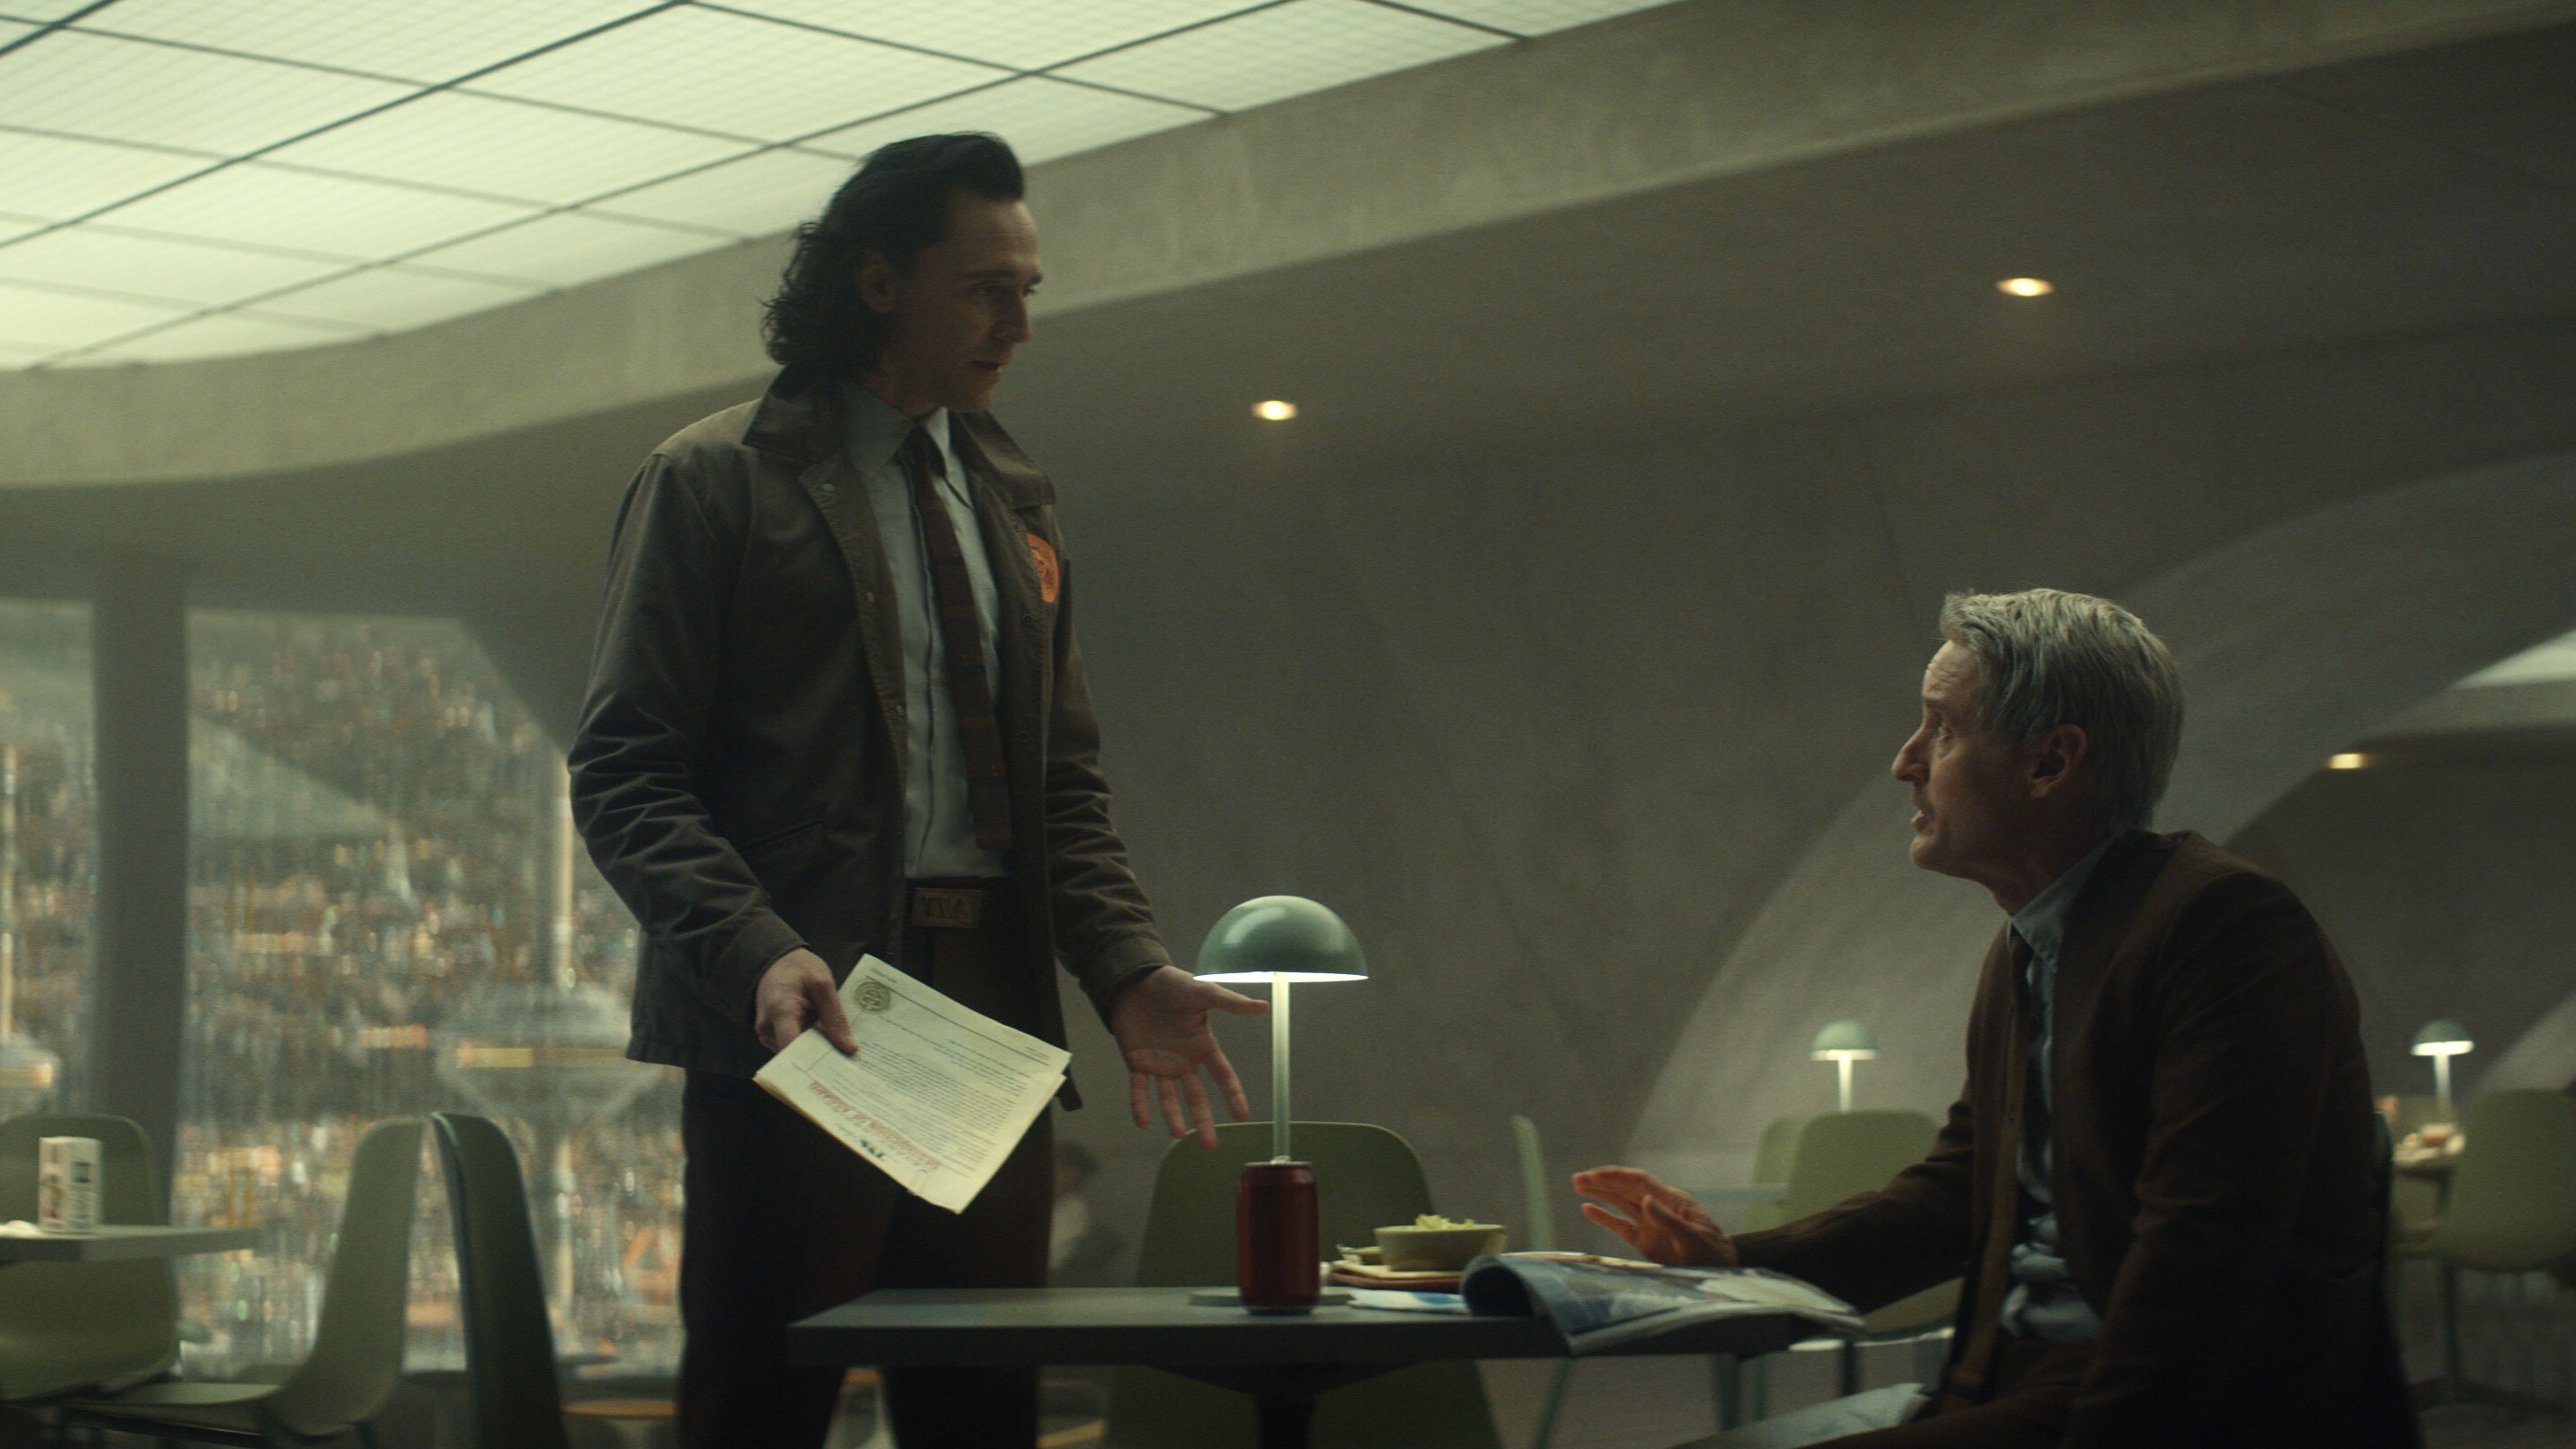 (L-R): Loki (Tom Hiddleston) and Mobius (Owen Wilson) in Marvel Studios' LOKI, exclusively on Disney+. Photo courtesy of Marvel Studios. ©Marvel Studios 2021. All Rights Reserved.